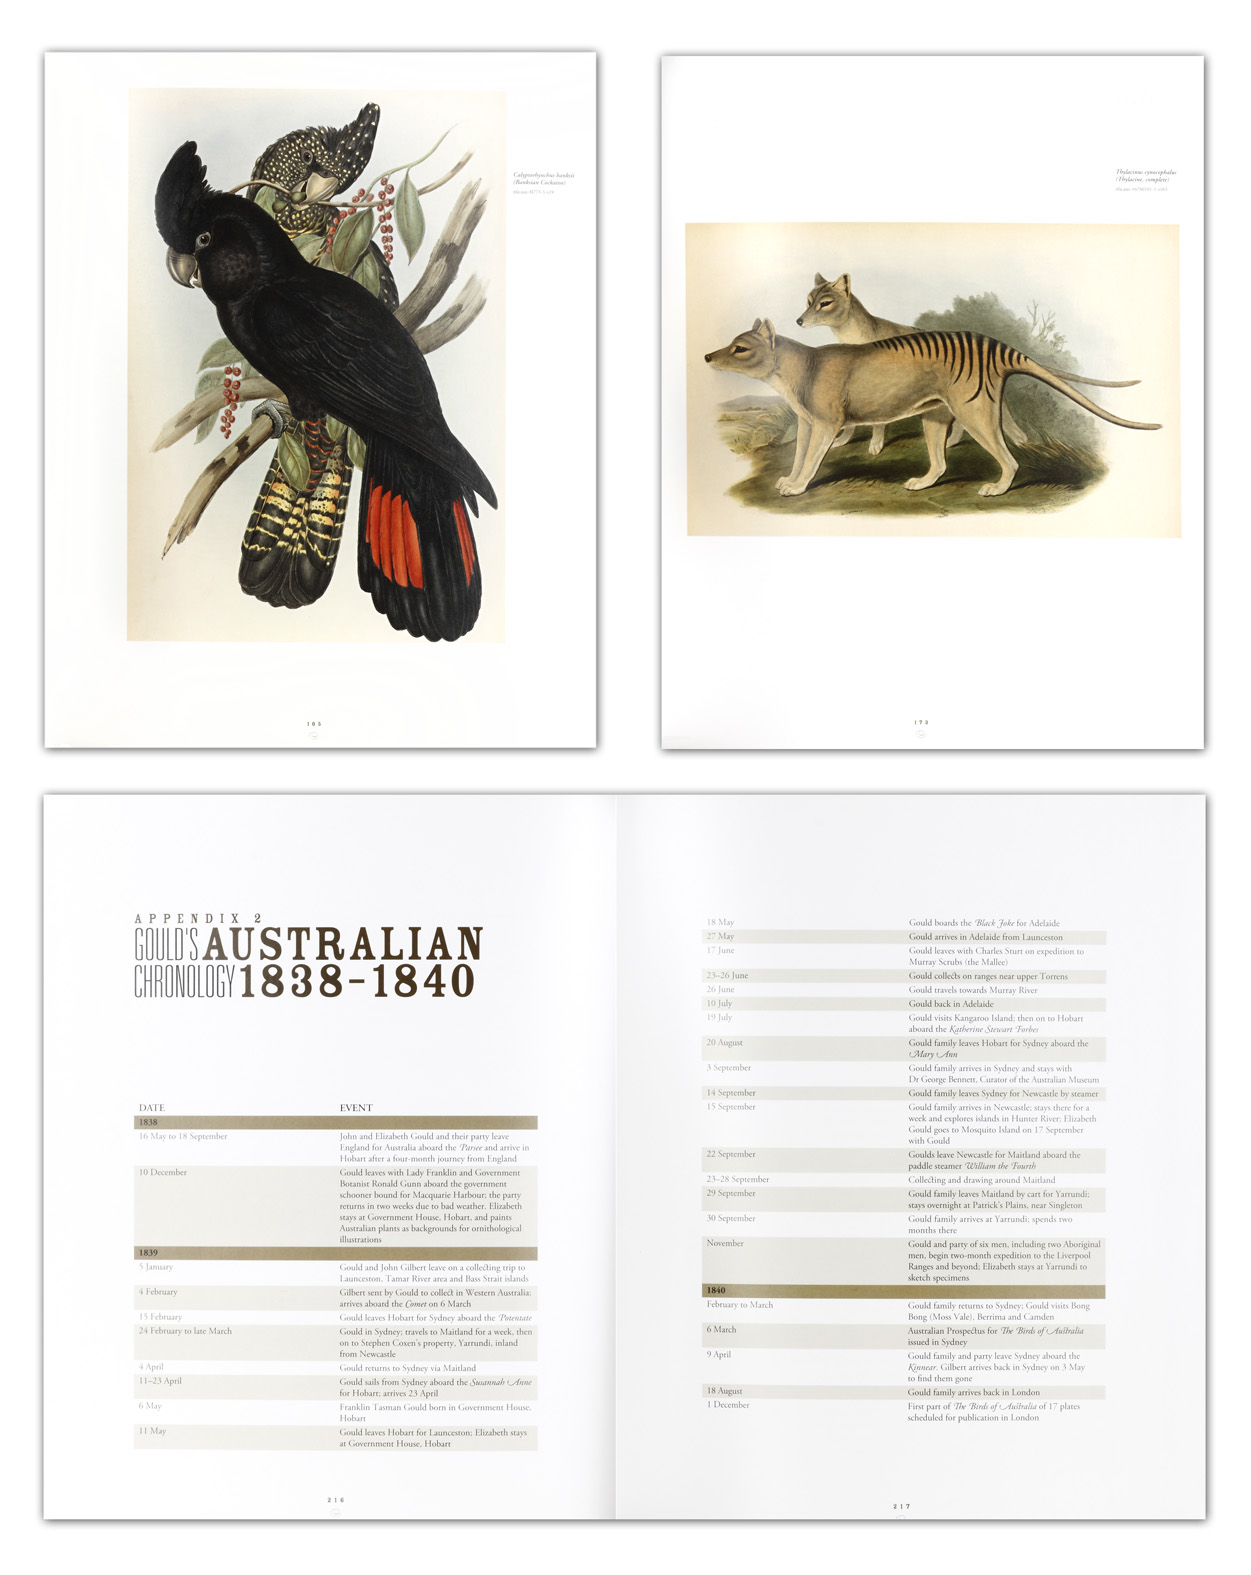 The Business of Nature John Gould and Australia. - Vintage Print from 2011